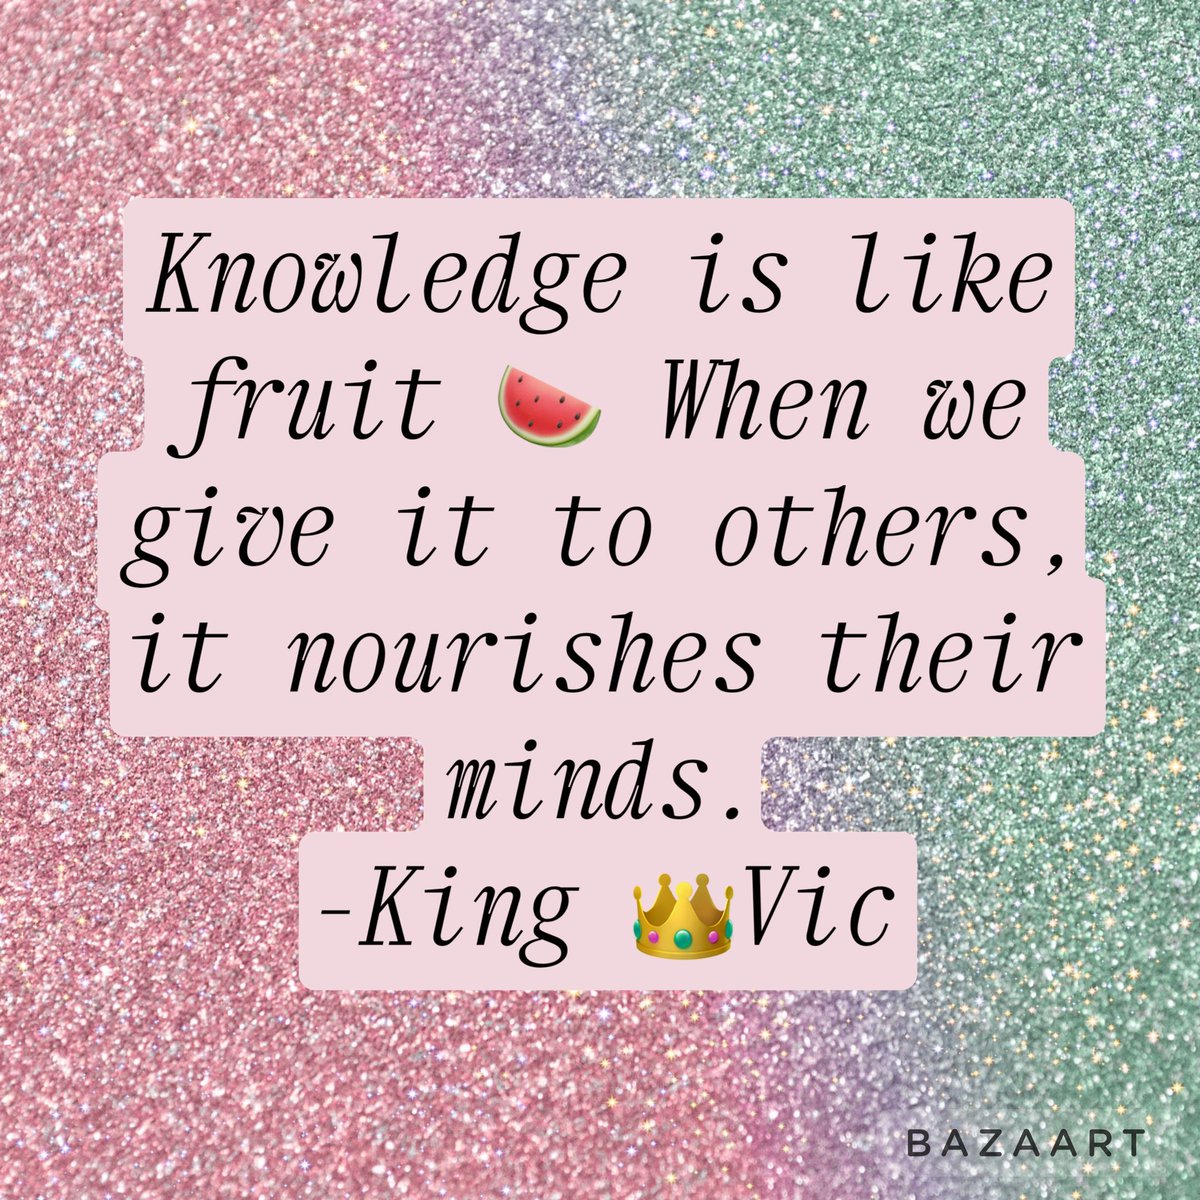 #KNOWLEDGE #KnowledgeIsPower #EducationMatters #give #share #INSPIREGREATNESS